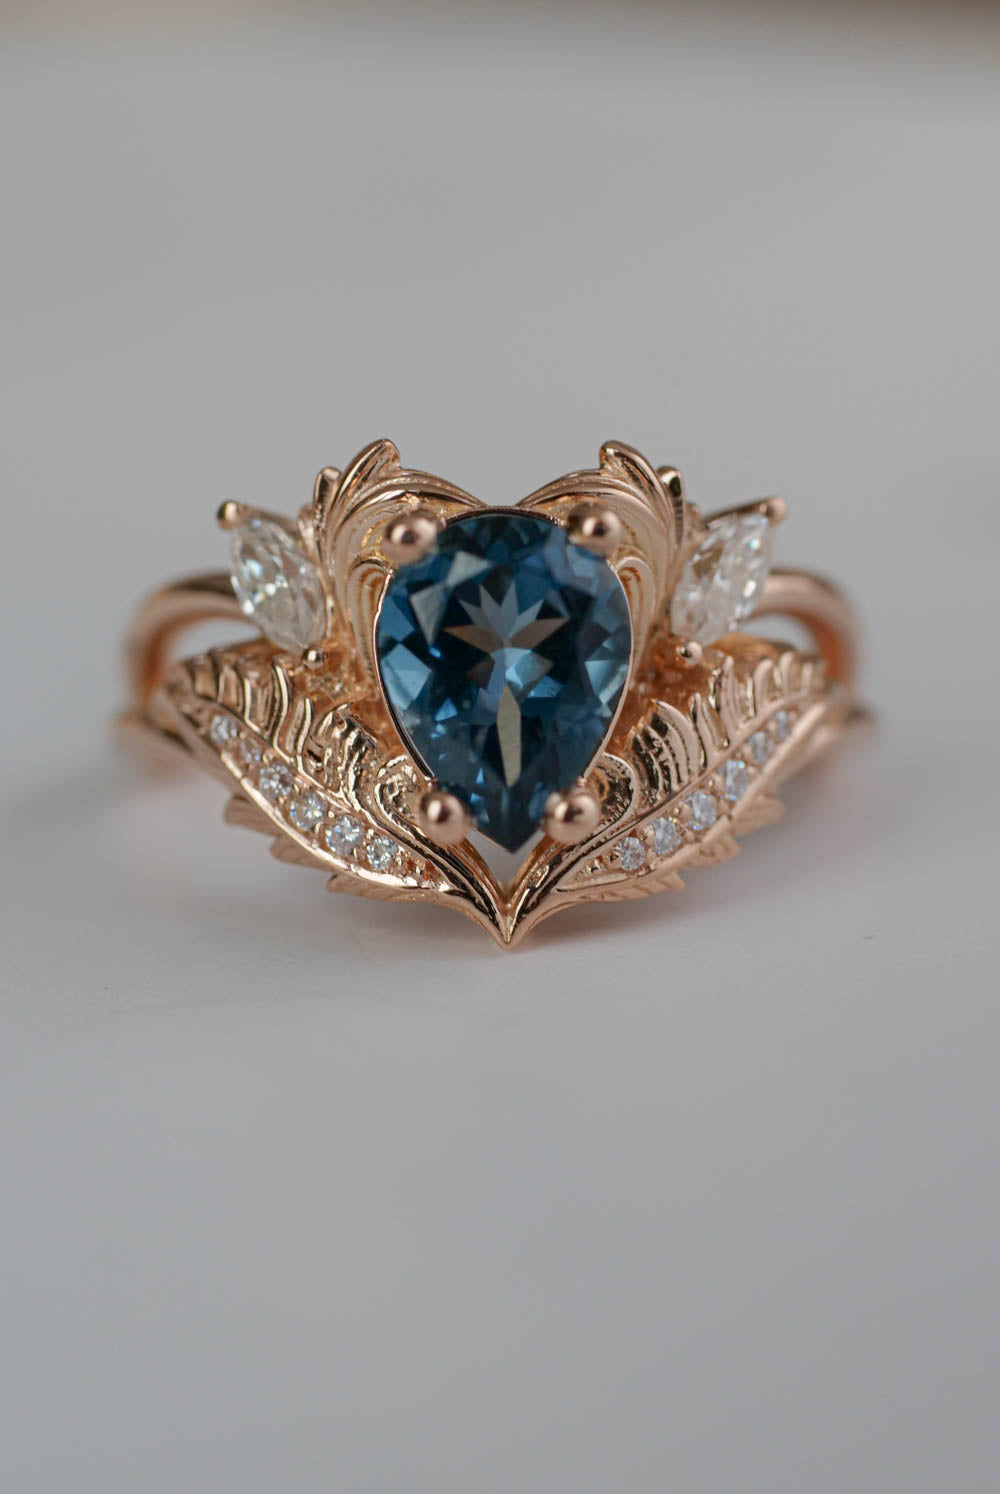 Adonis style engagement ring by Eden Garden Jewelry with london blue topaz, engagement rings in rose gold 